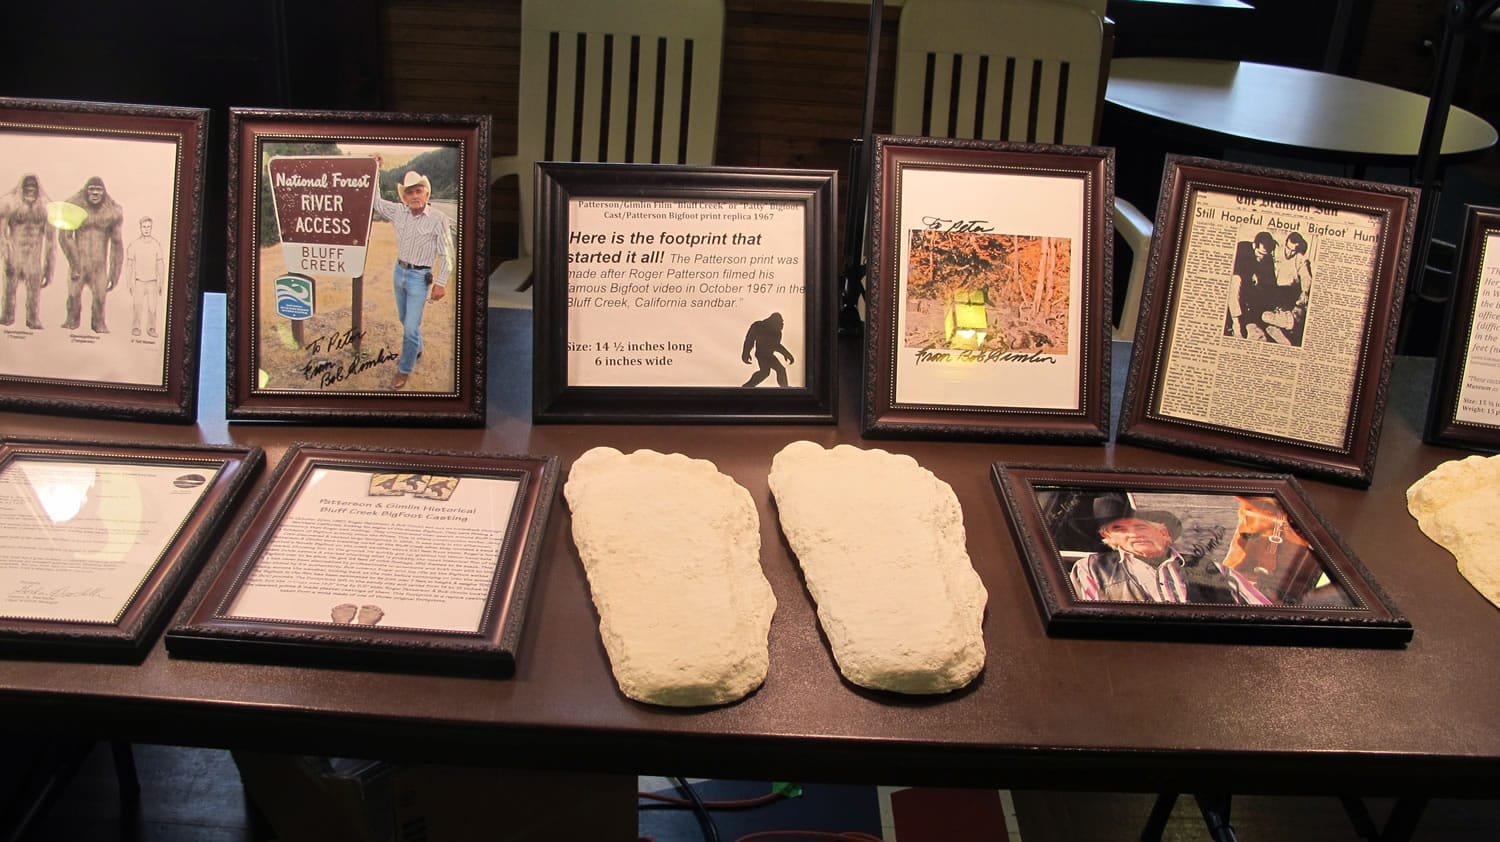 Plaster casts and framed photos line one of the display tables at the 4th annual Chautauqua Lake Bigfoot Expo in Chautauqua, N.Y., on Saturday.  Believers and the curious gather in the rural western New York county to swap stories and hear lectures about the legendary Sasquatch.